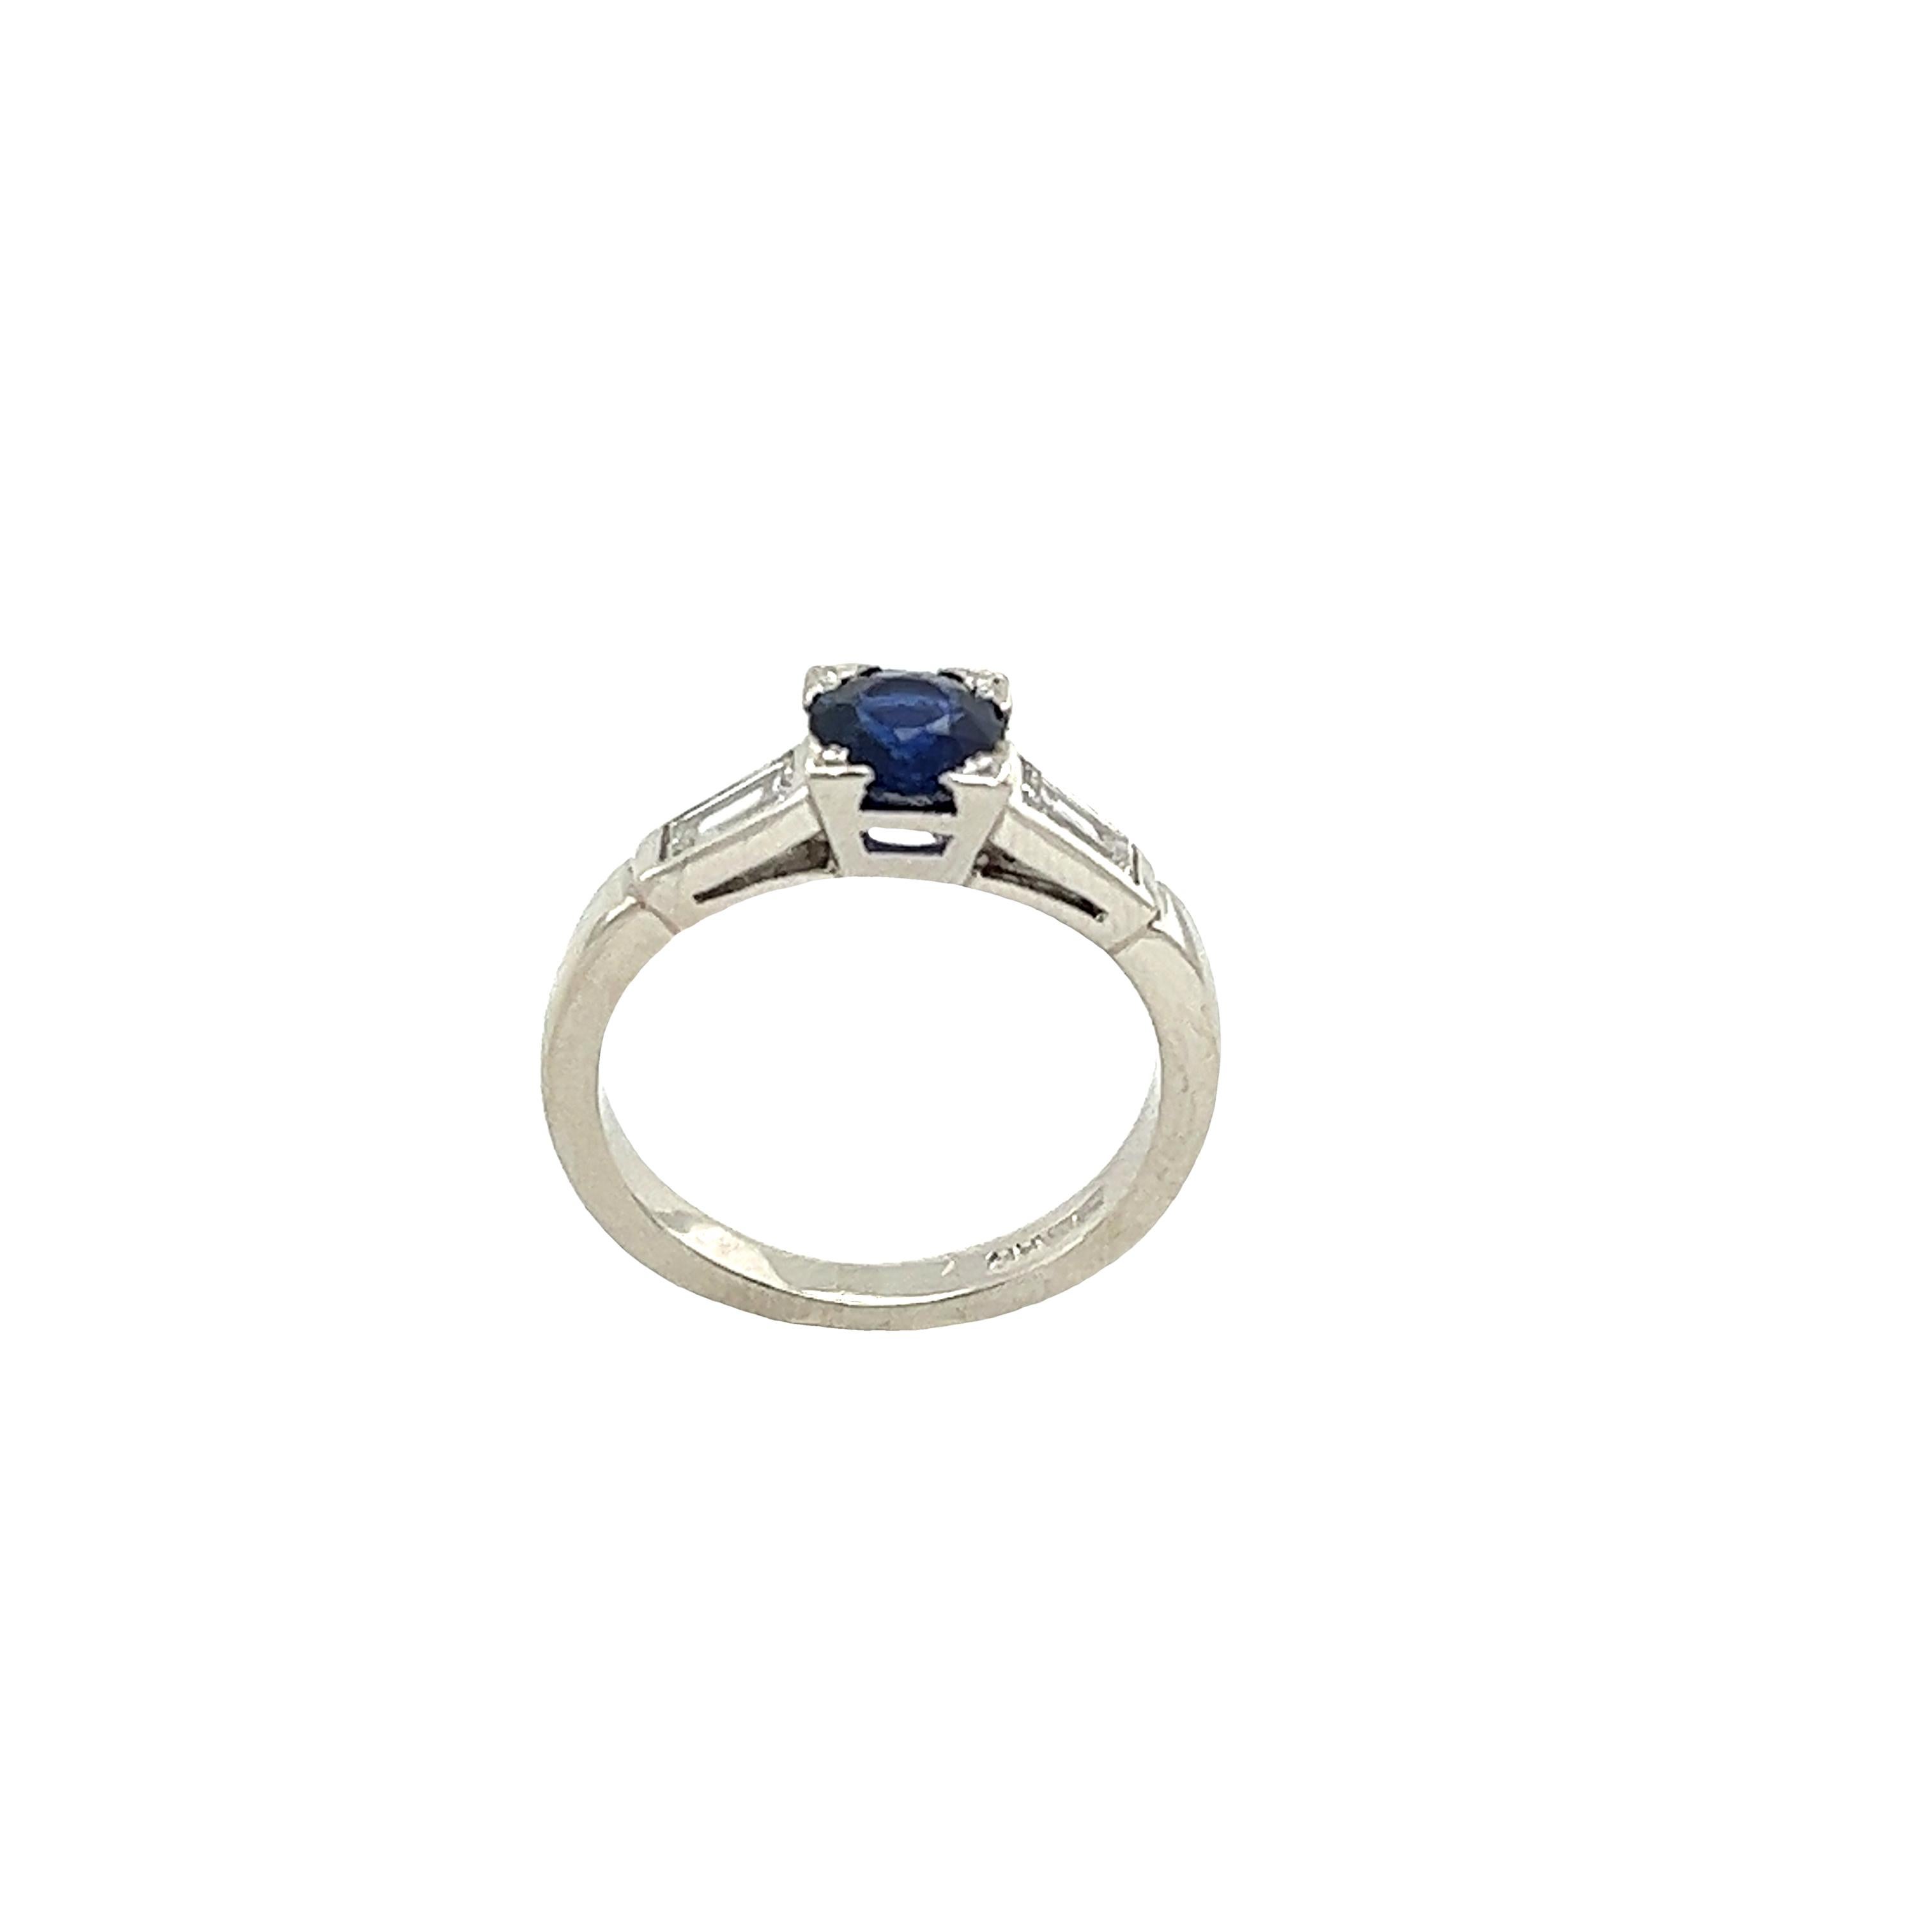 Platinum 0.60ct Sapphire & Diamond Ring Set With 2 Baguettes Diamonds on Sides In Excellent Condition For Sale In London, GB